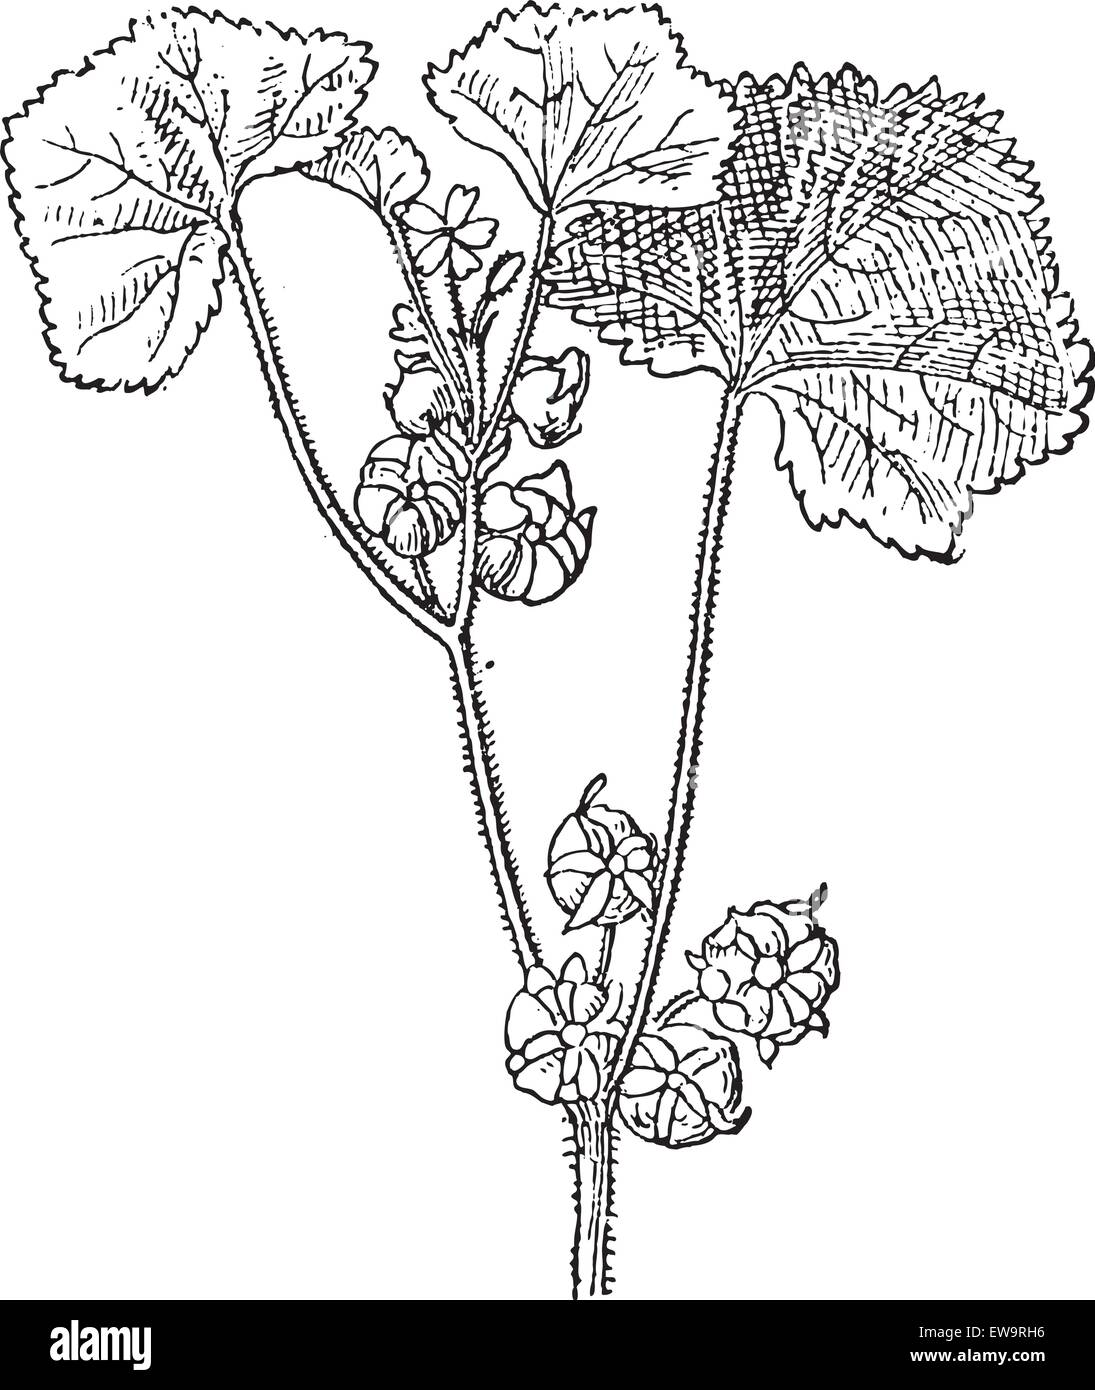 Roundleaf Mallow or Malva neglecta, showing flowers, vintage engraved illustration. Dictionary of Words and Things - Larive and Fleury - 1895 Stock Vector